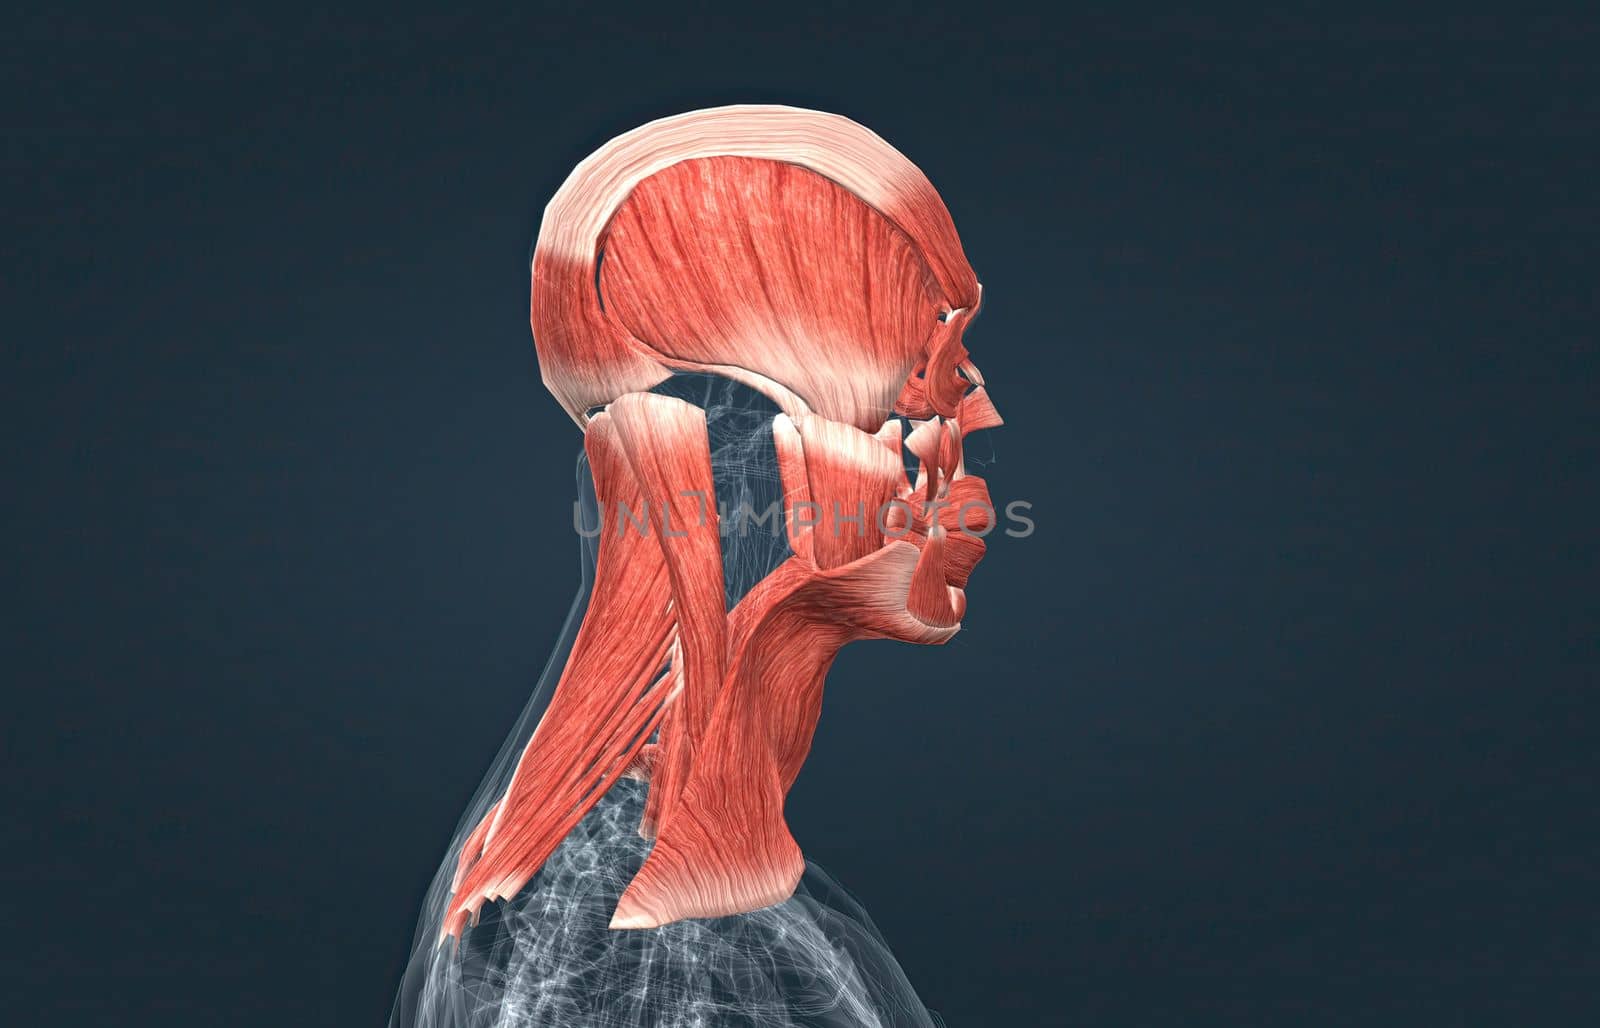 Anatomy of male head muscular system by creativepic